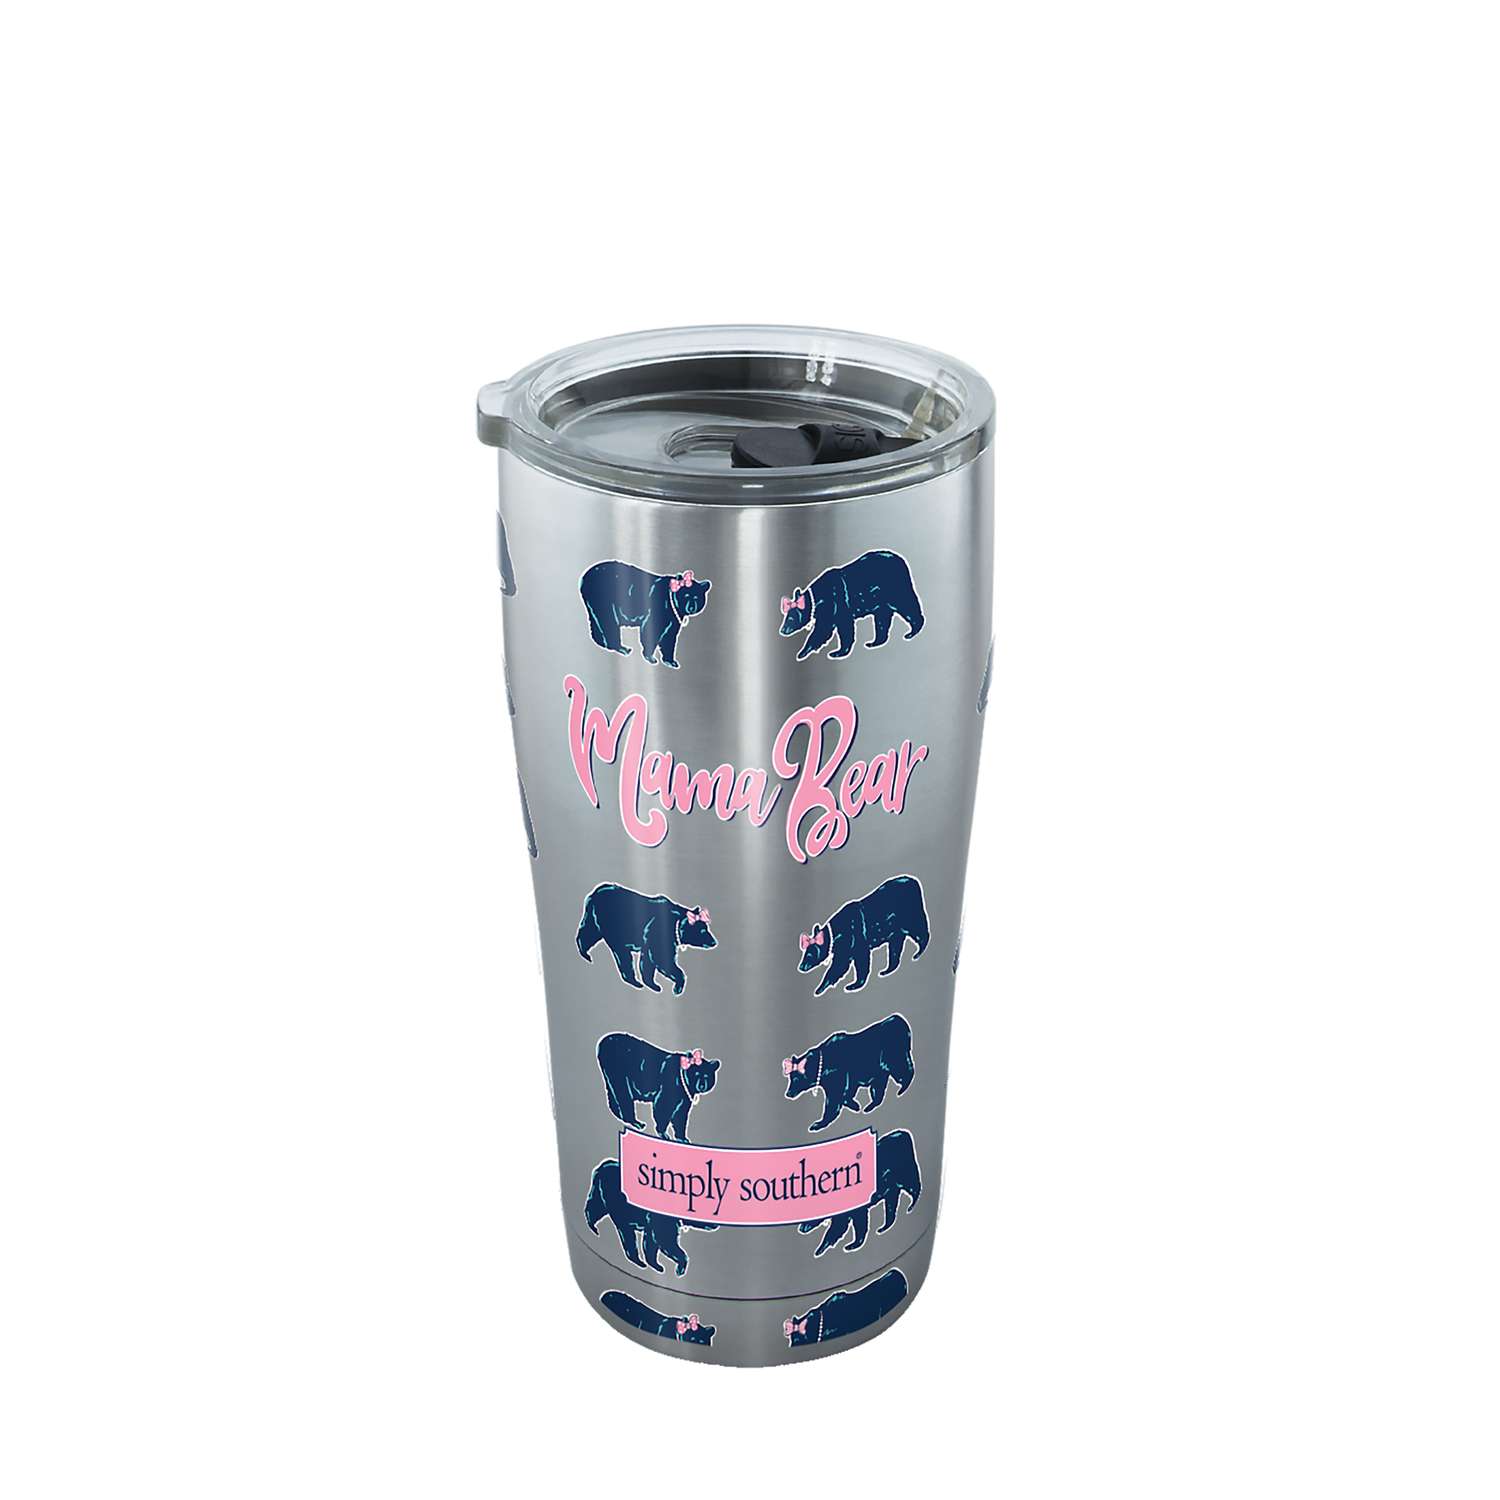 Tervis Trailer Bears Wrap 24 Oz. BPA Free Insulated Tumbler with Travel Lid